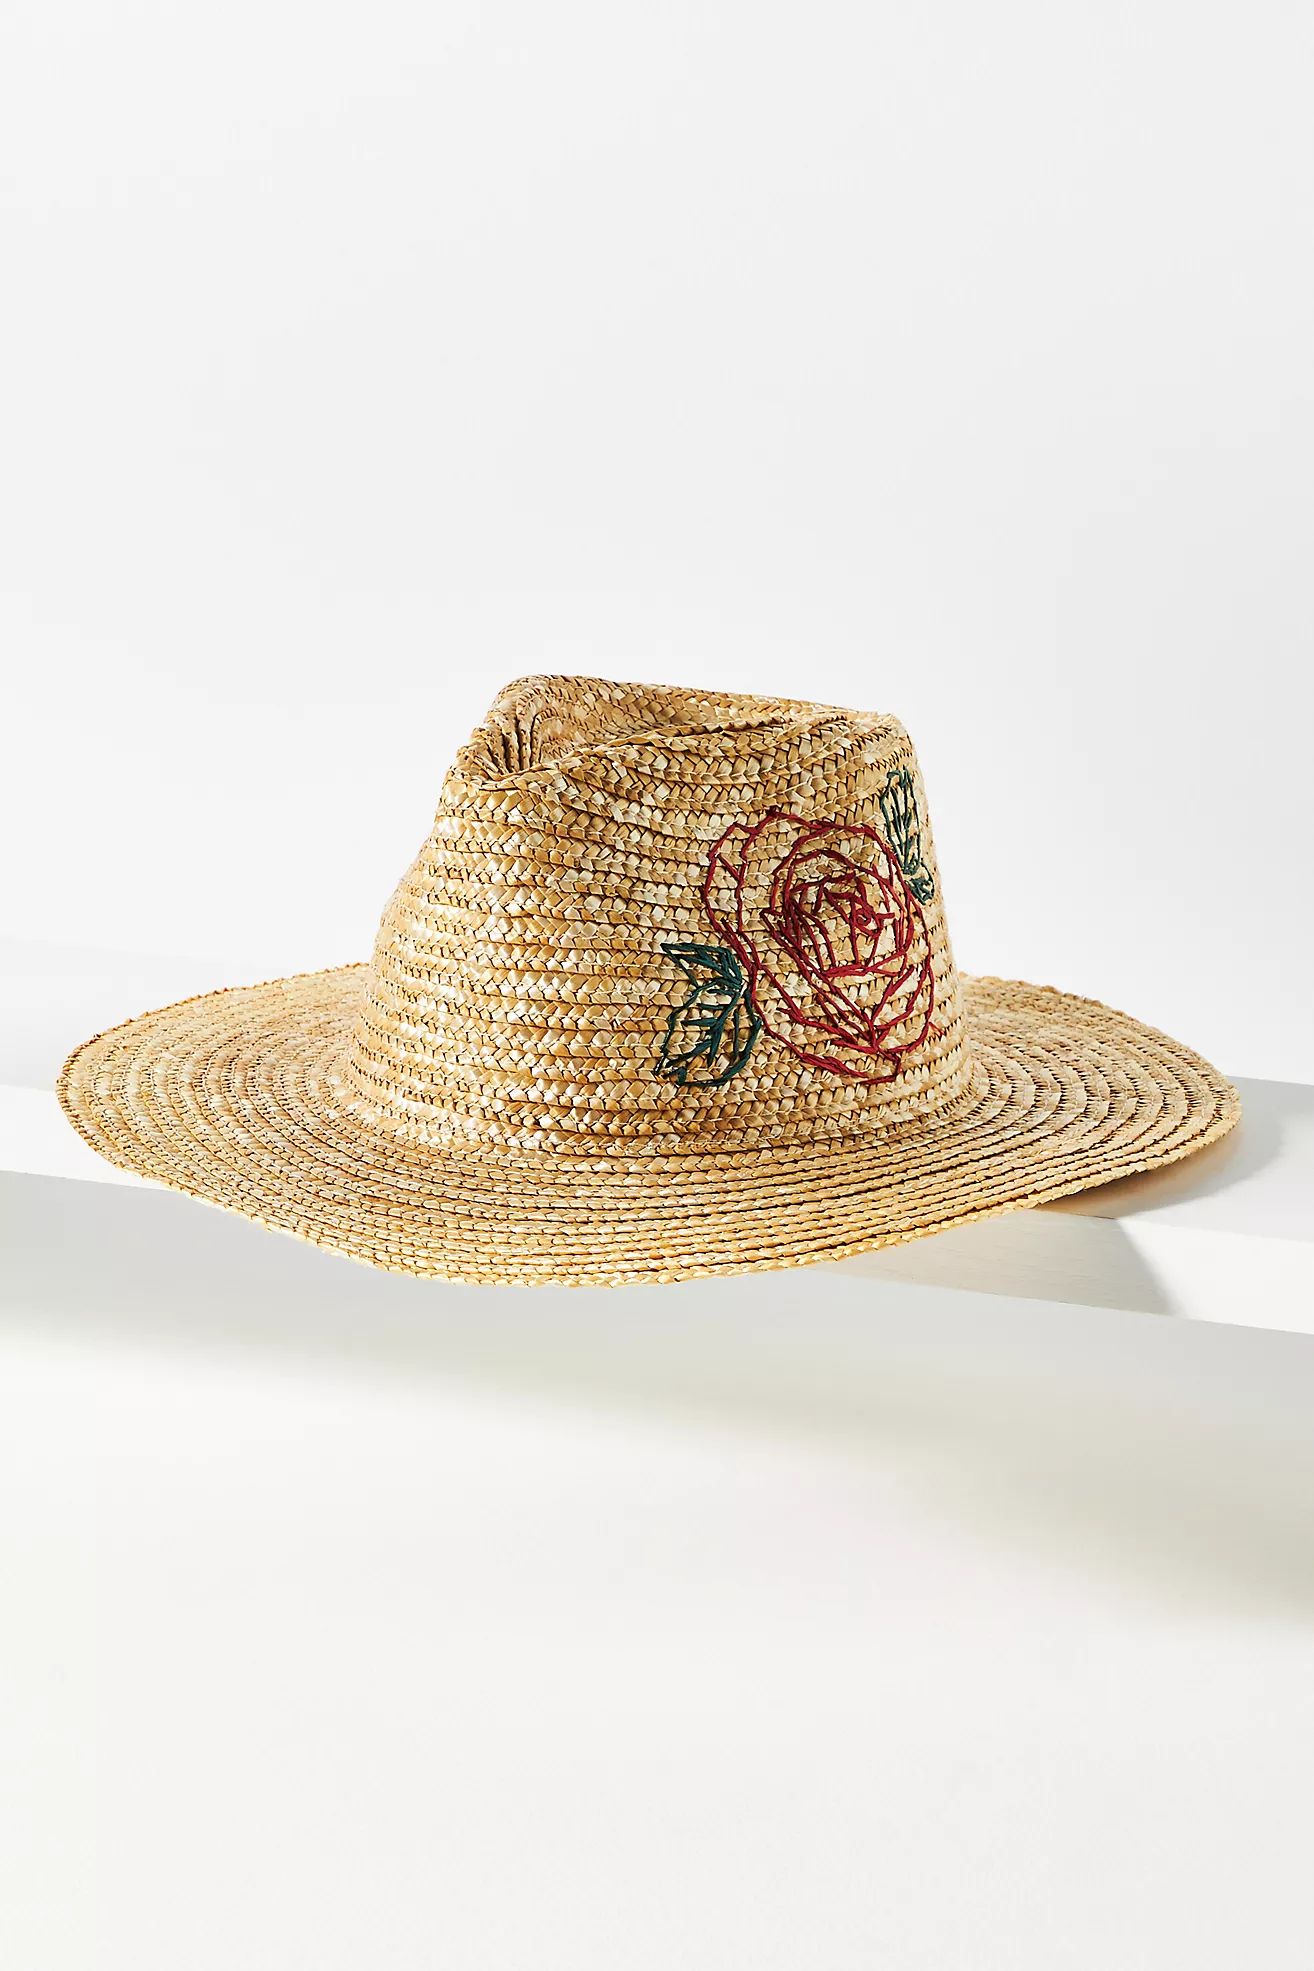 San Diego Hat Co. Embroidered Rose Fedora | Anthropologie (US)